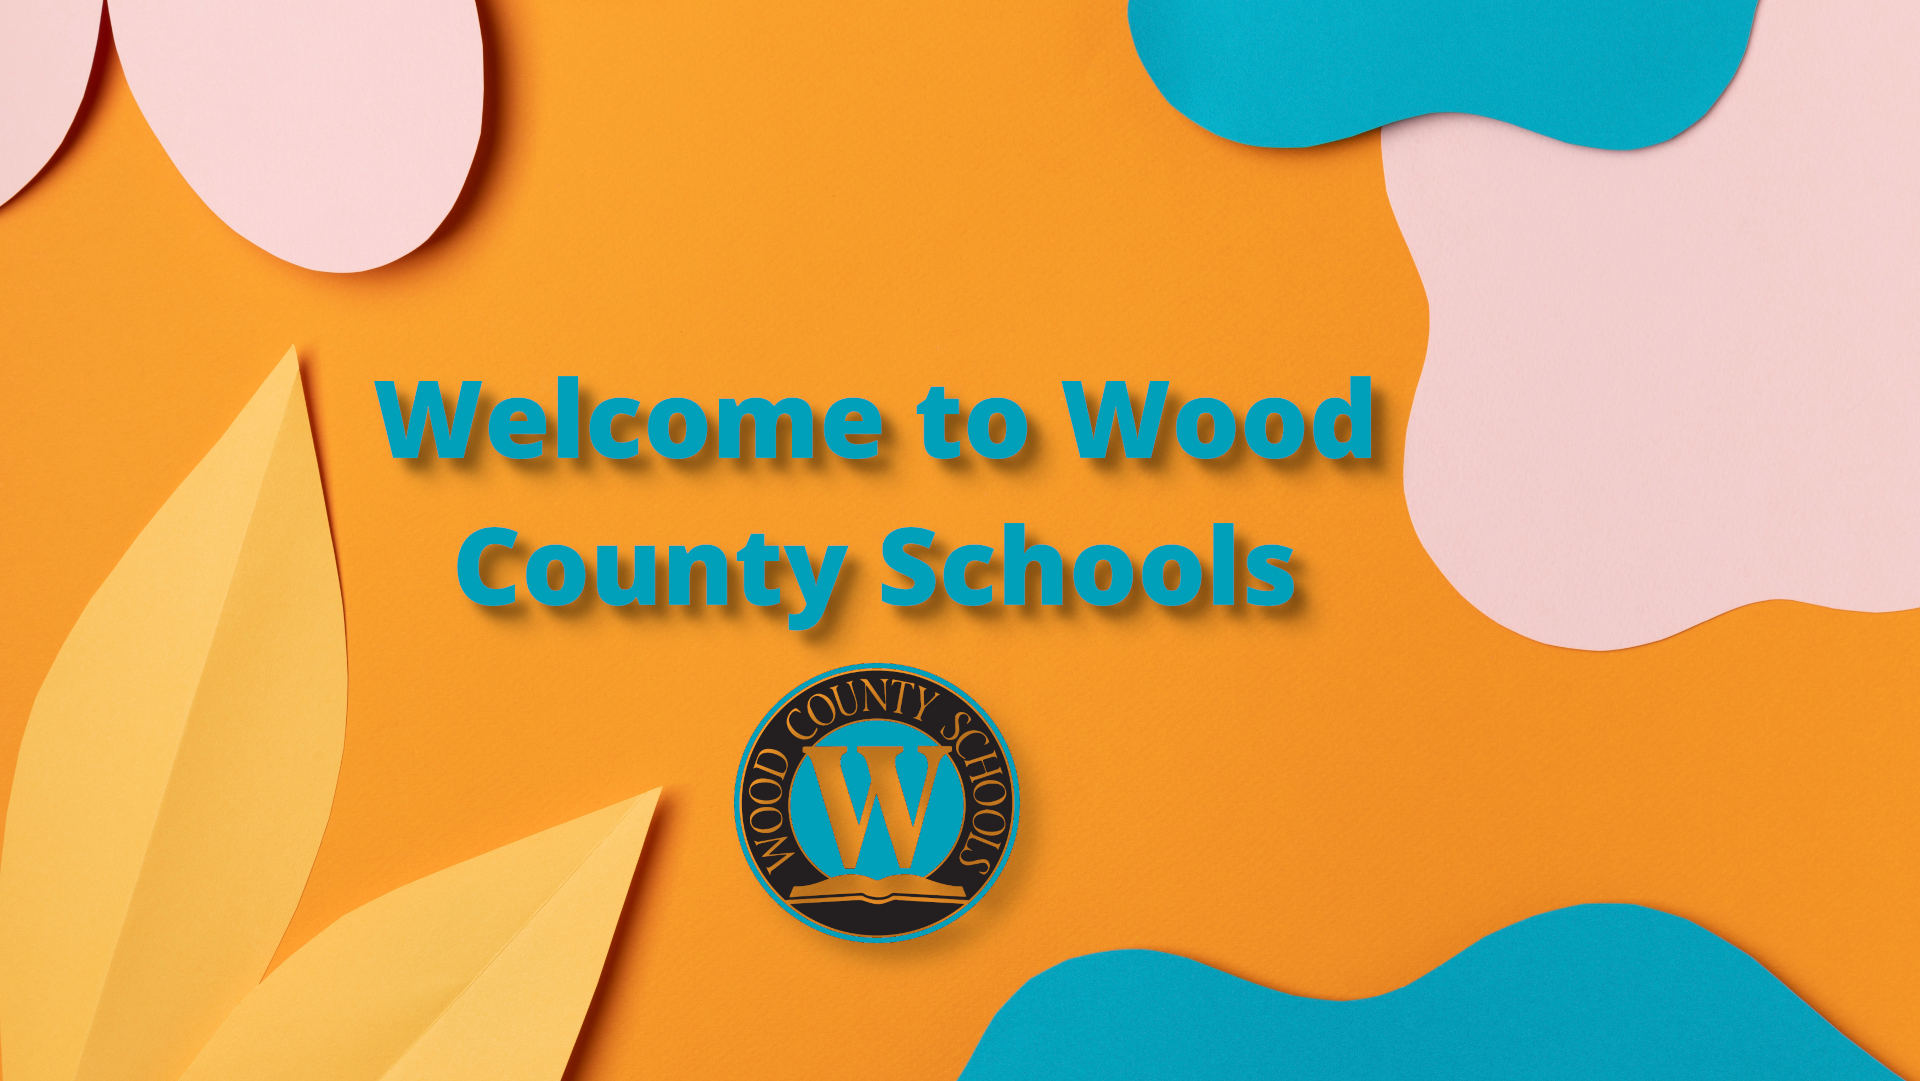 welcome to wood county schools image with various colors and paper cut outs